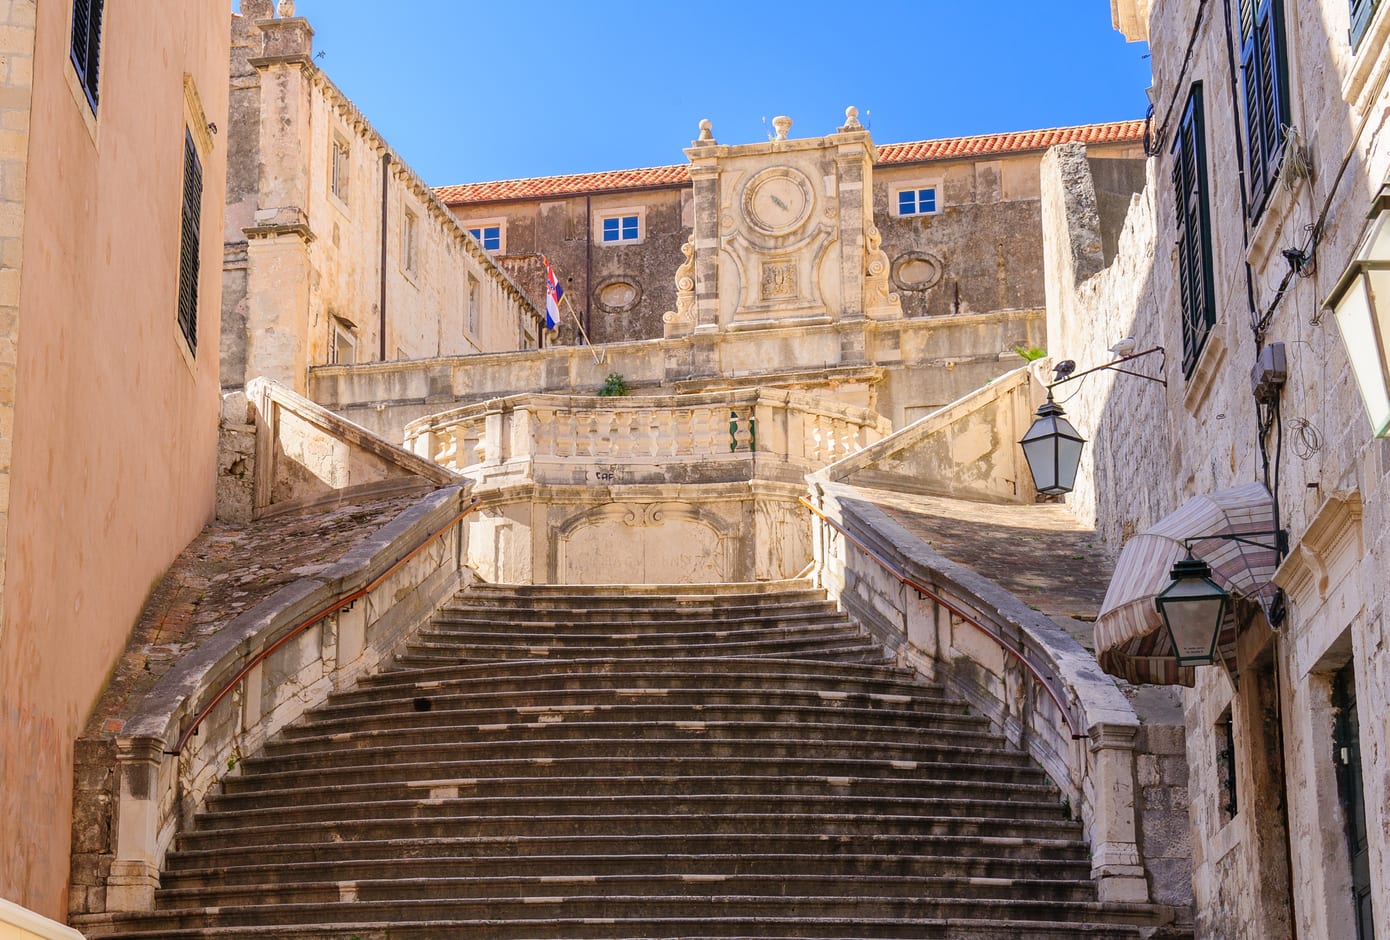 The Jesuit Staircase leading up to the Jesuit Church of St. Ignatius Loyola and the old Collegium Ragusinum in Dubrovnik
